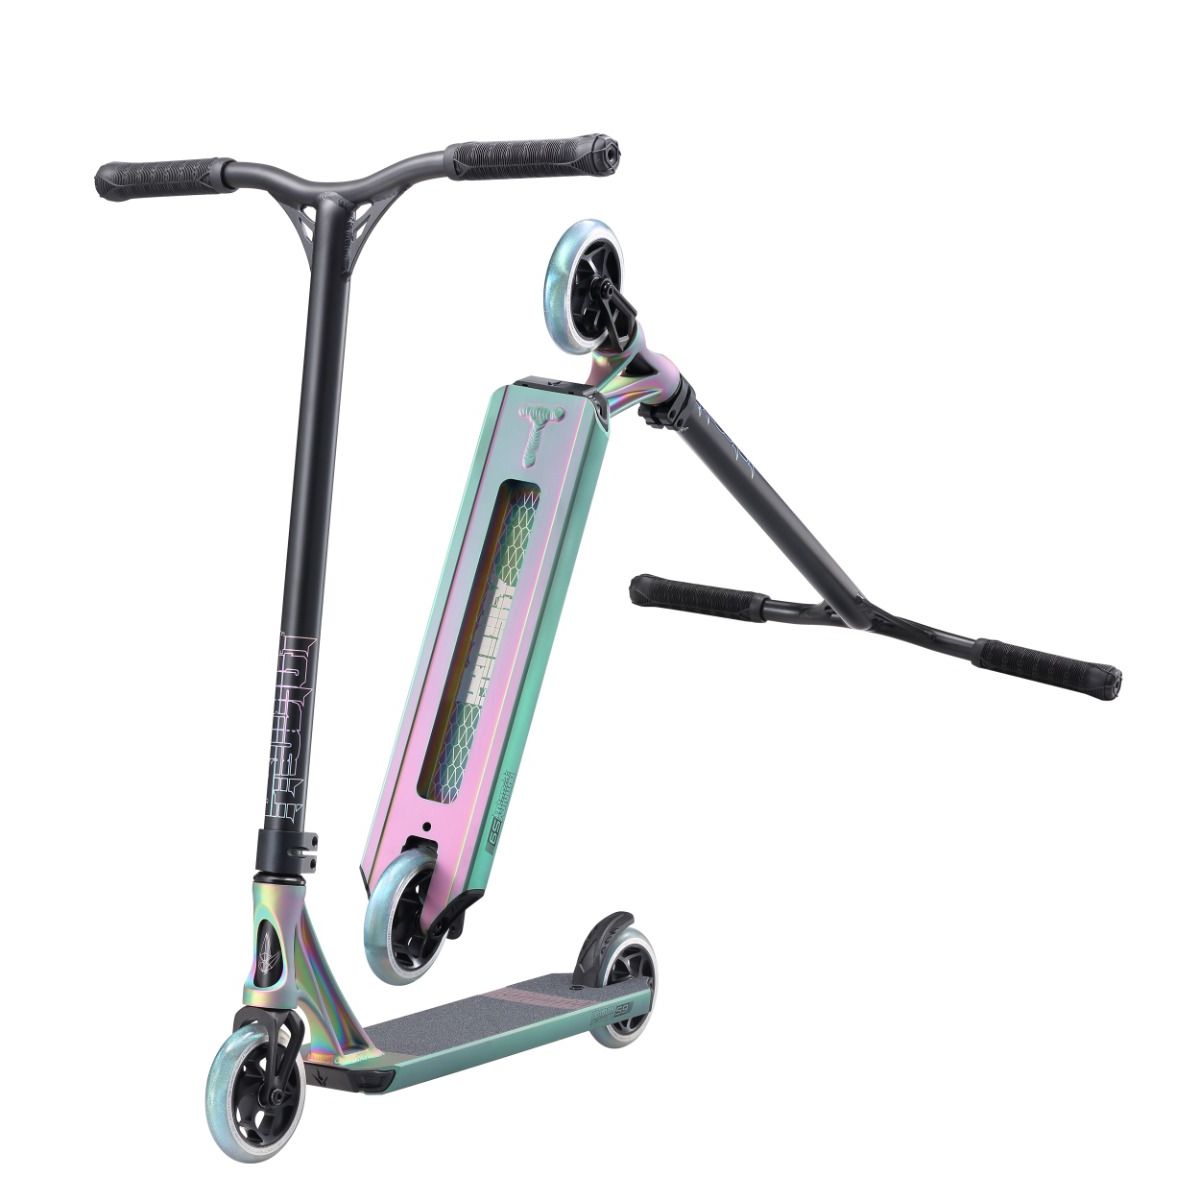 Experience the Adrenaline Rush with the Blunt Envy Scooter